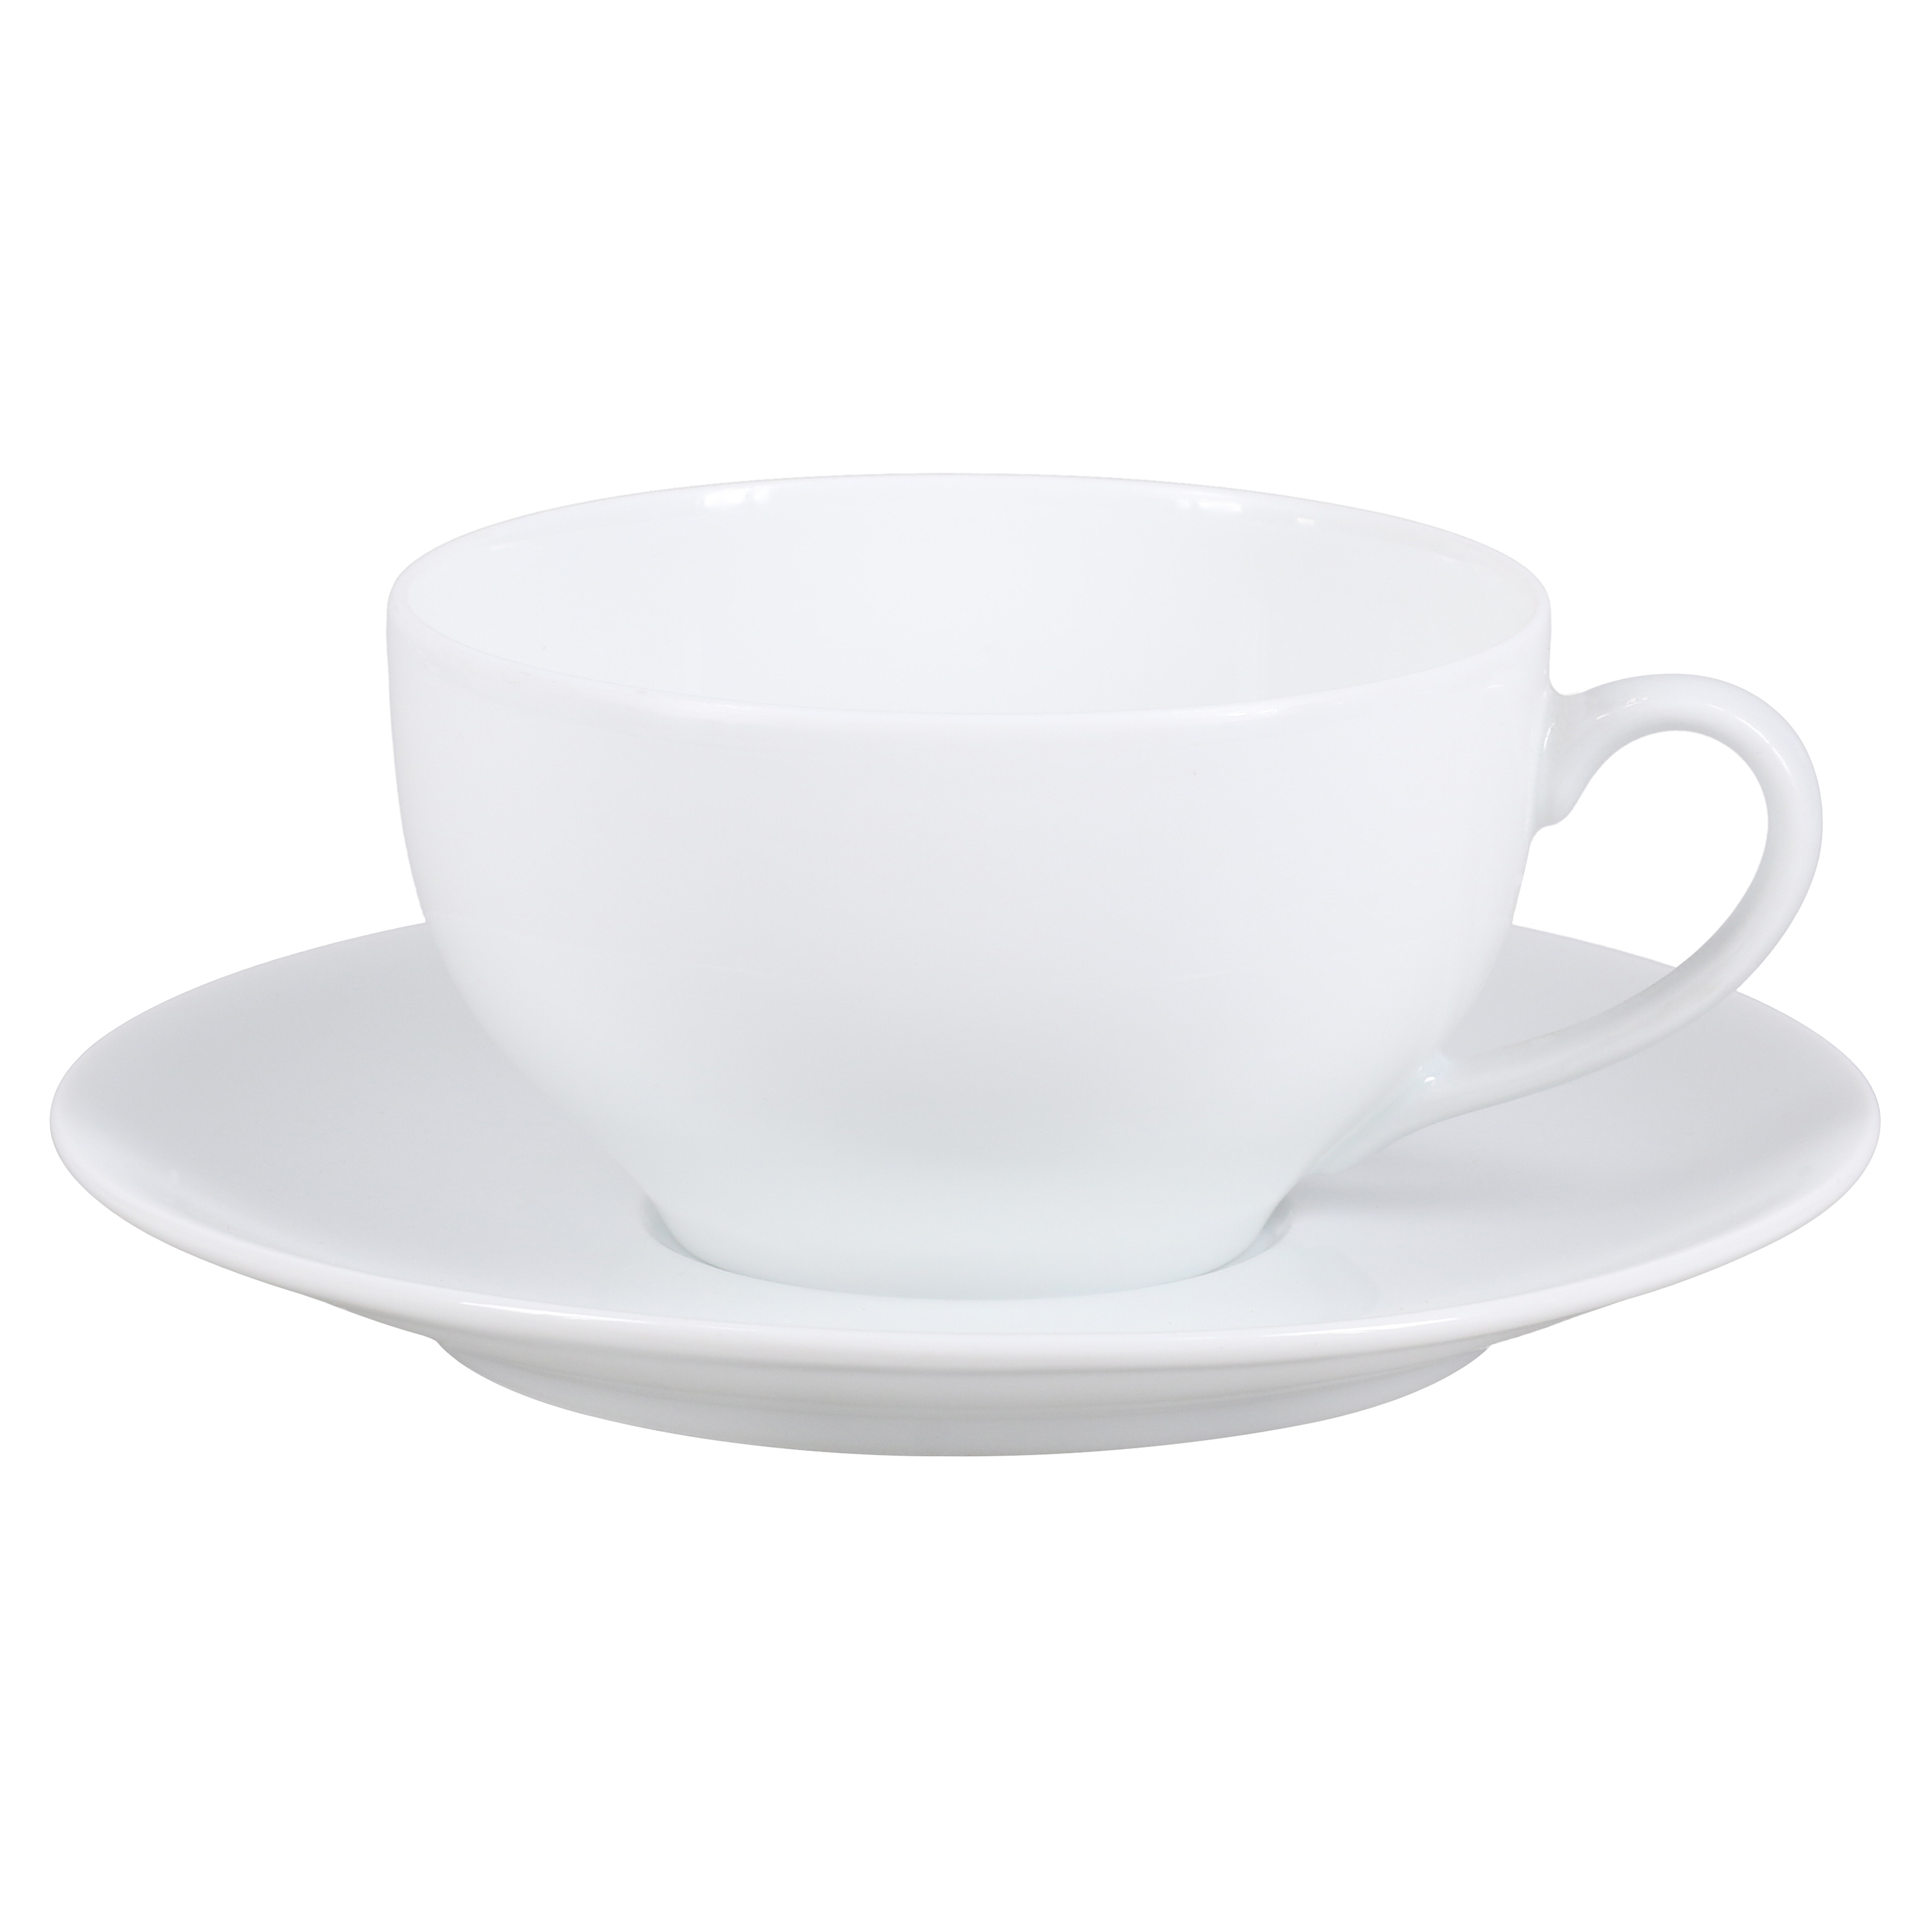 Coupe - Tea cup and saucer 0.20 litre